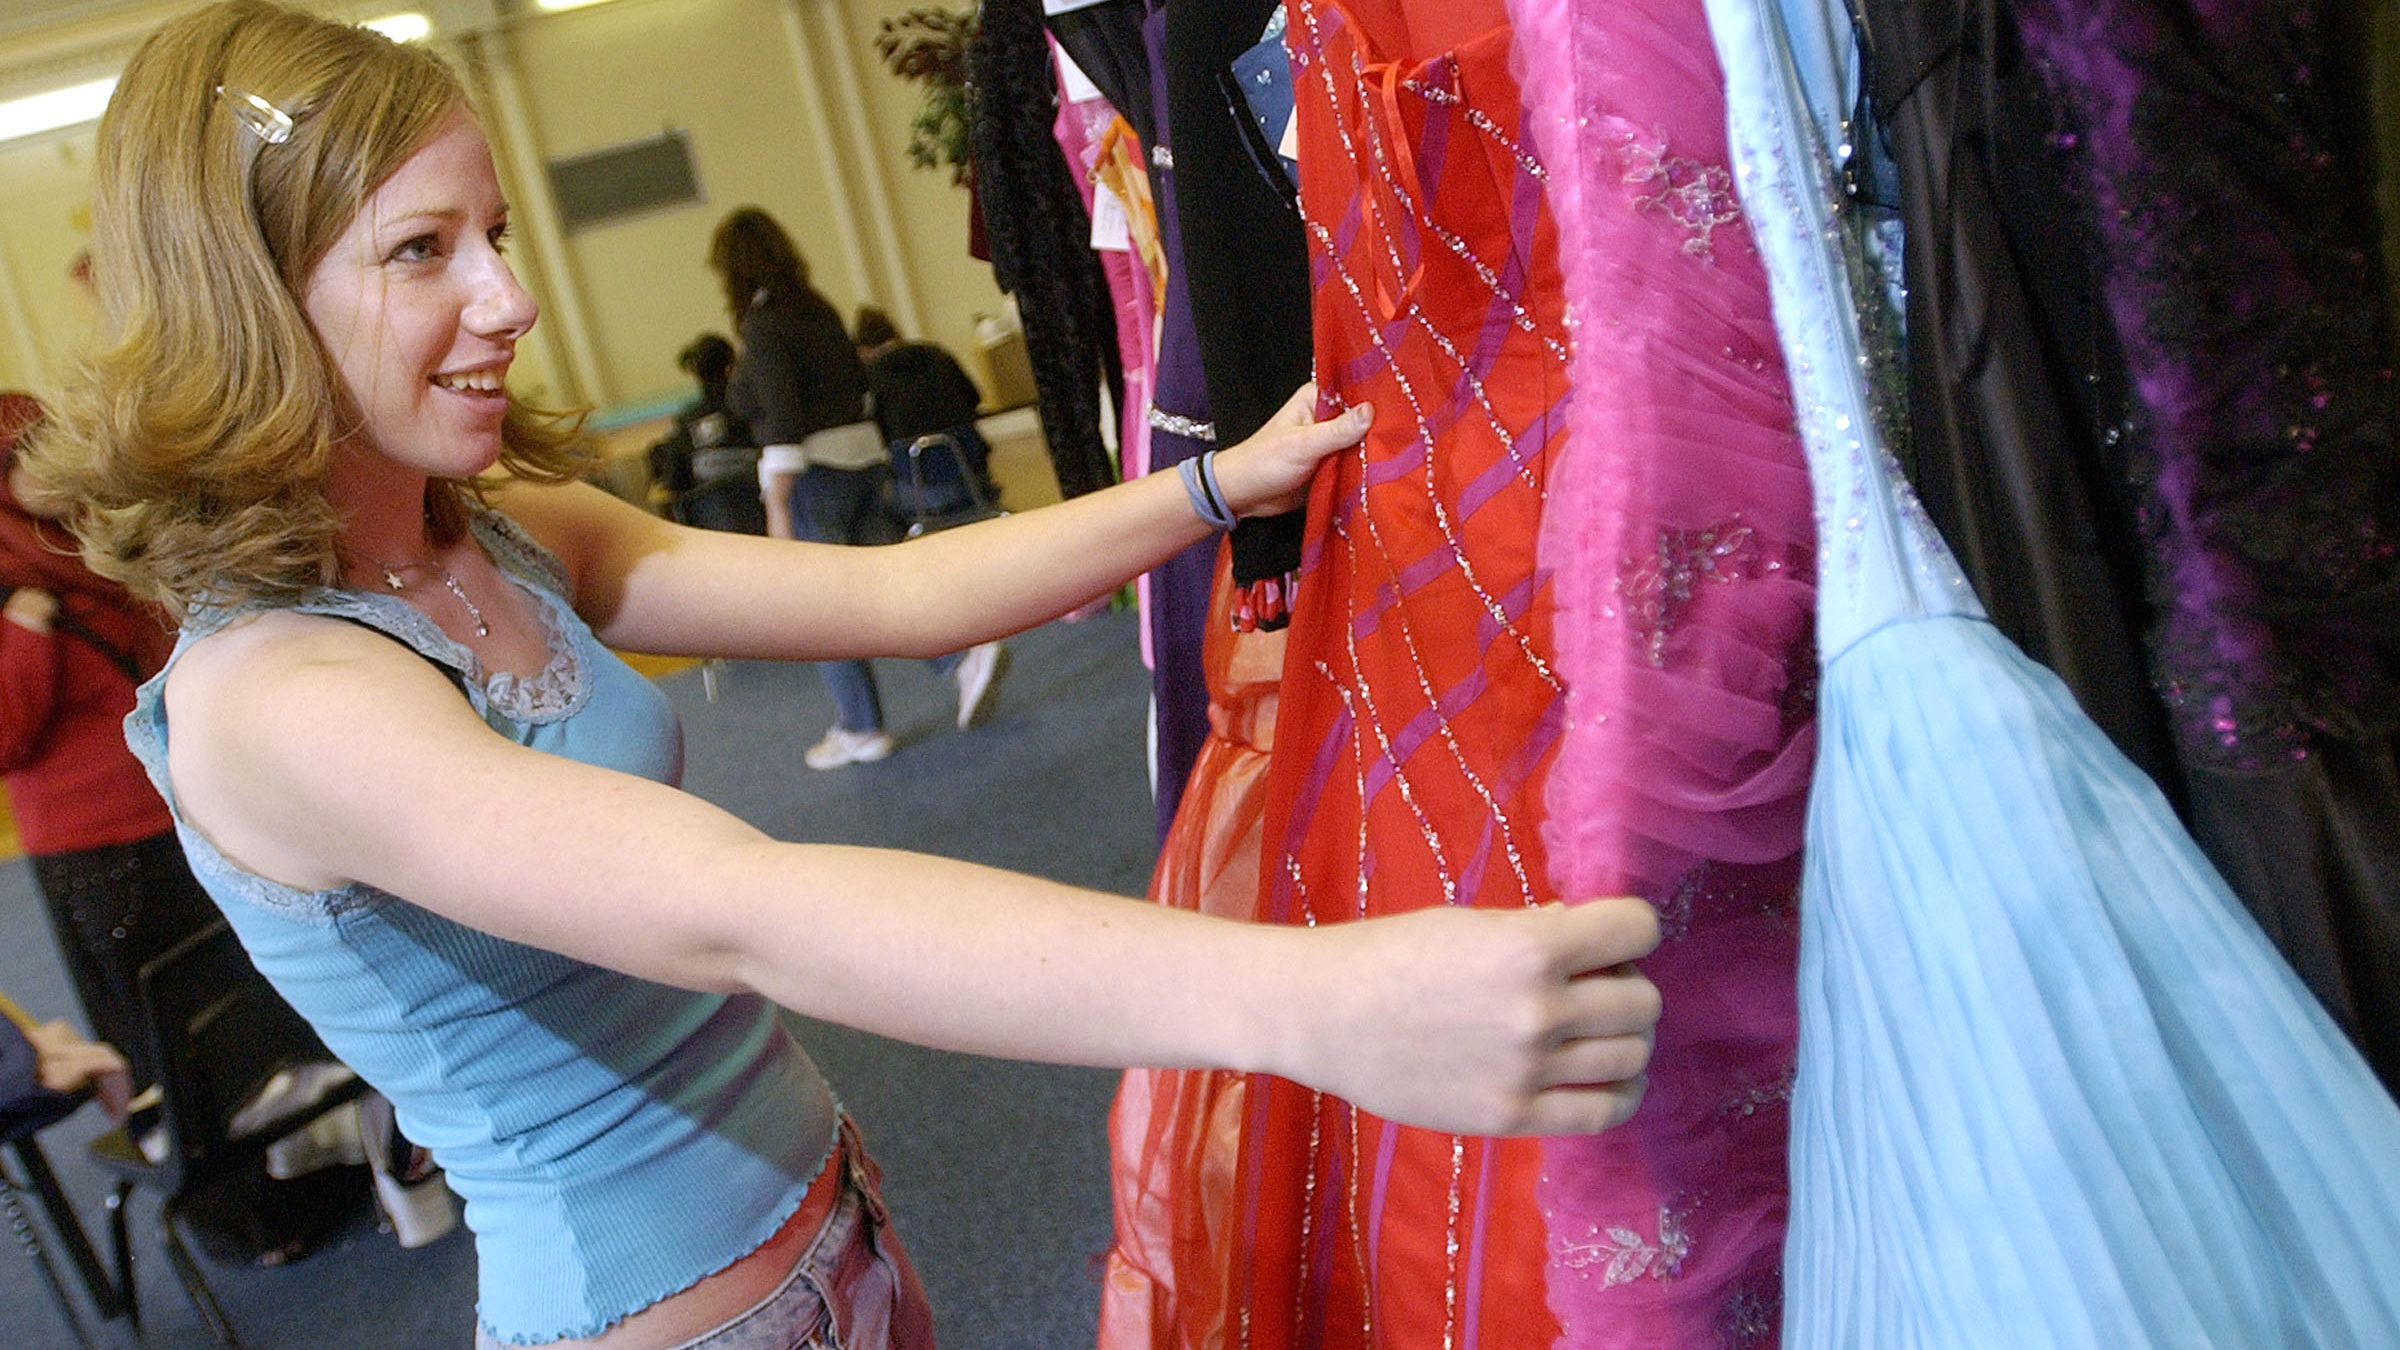 a teen is pictured looking at formal wear...